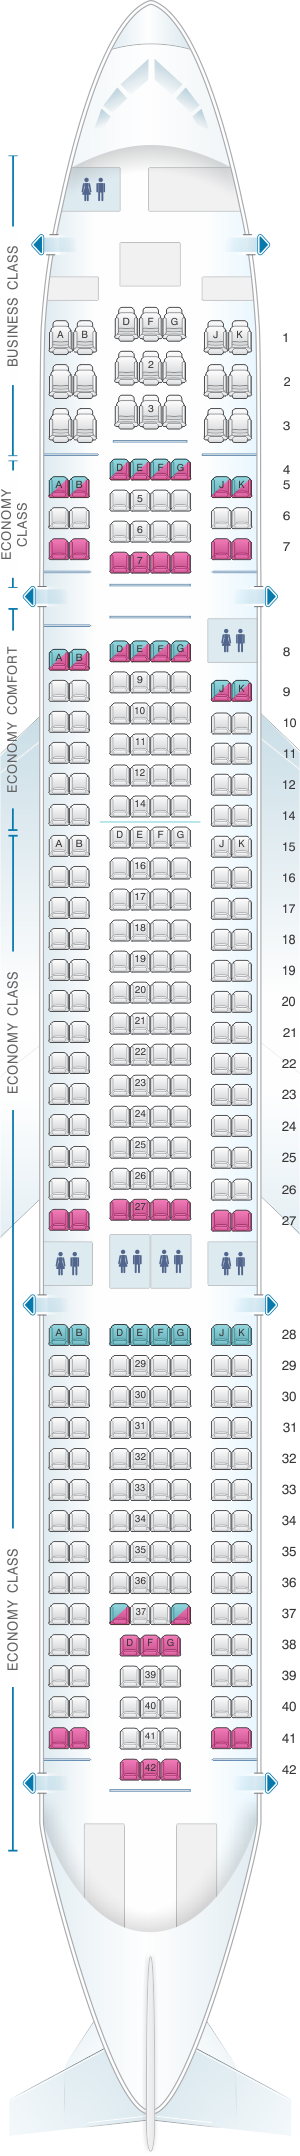 Seat Map Eurowings Airbus A330 200 | SeatMaestro